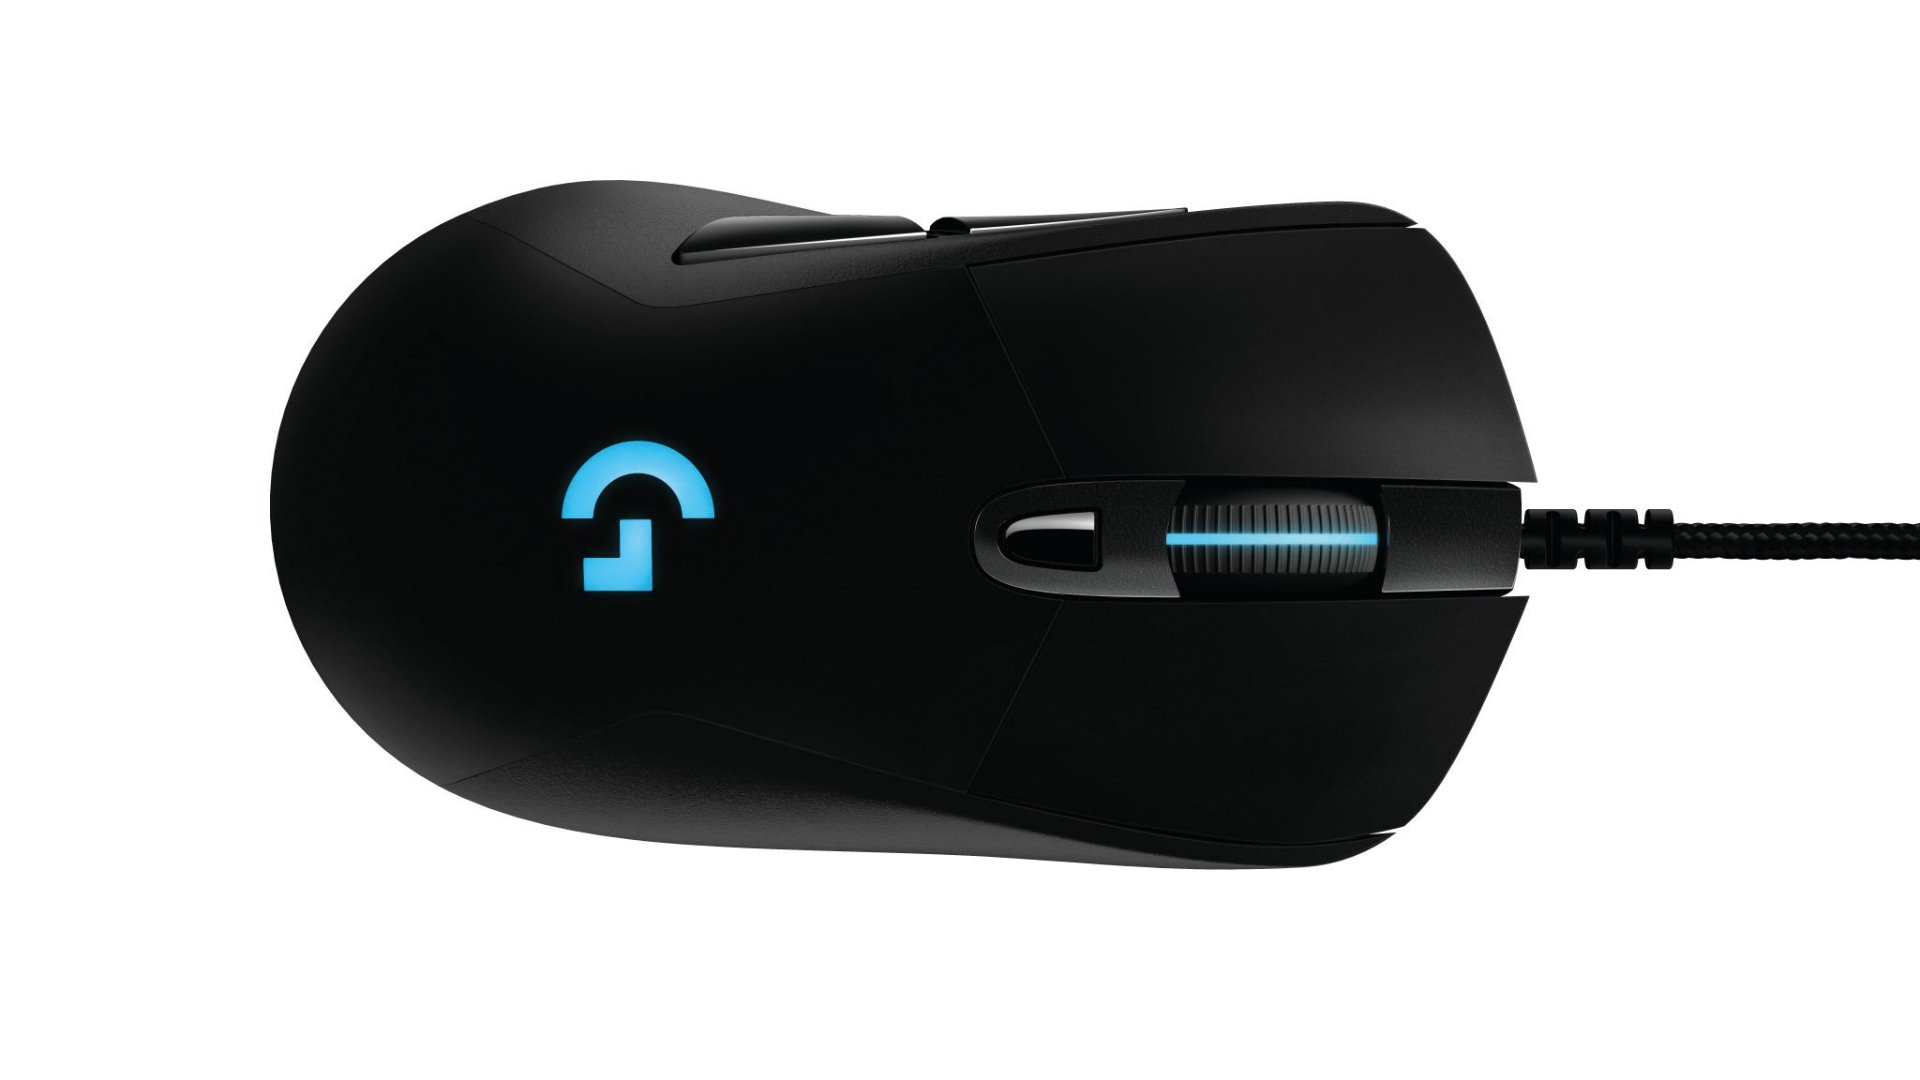 How To Pair Logitech G403 Wireless Gaming Mouse